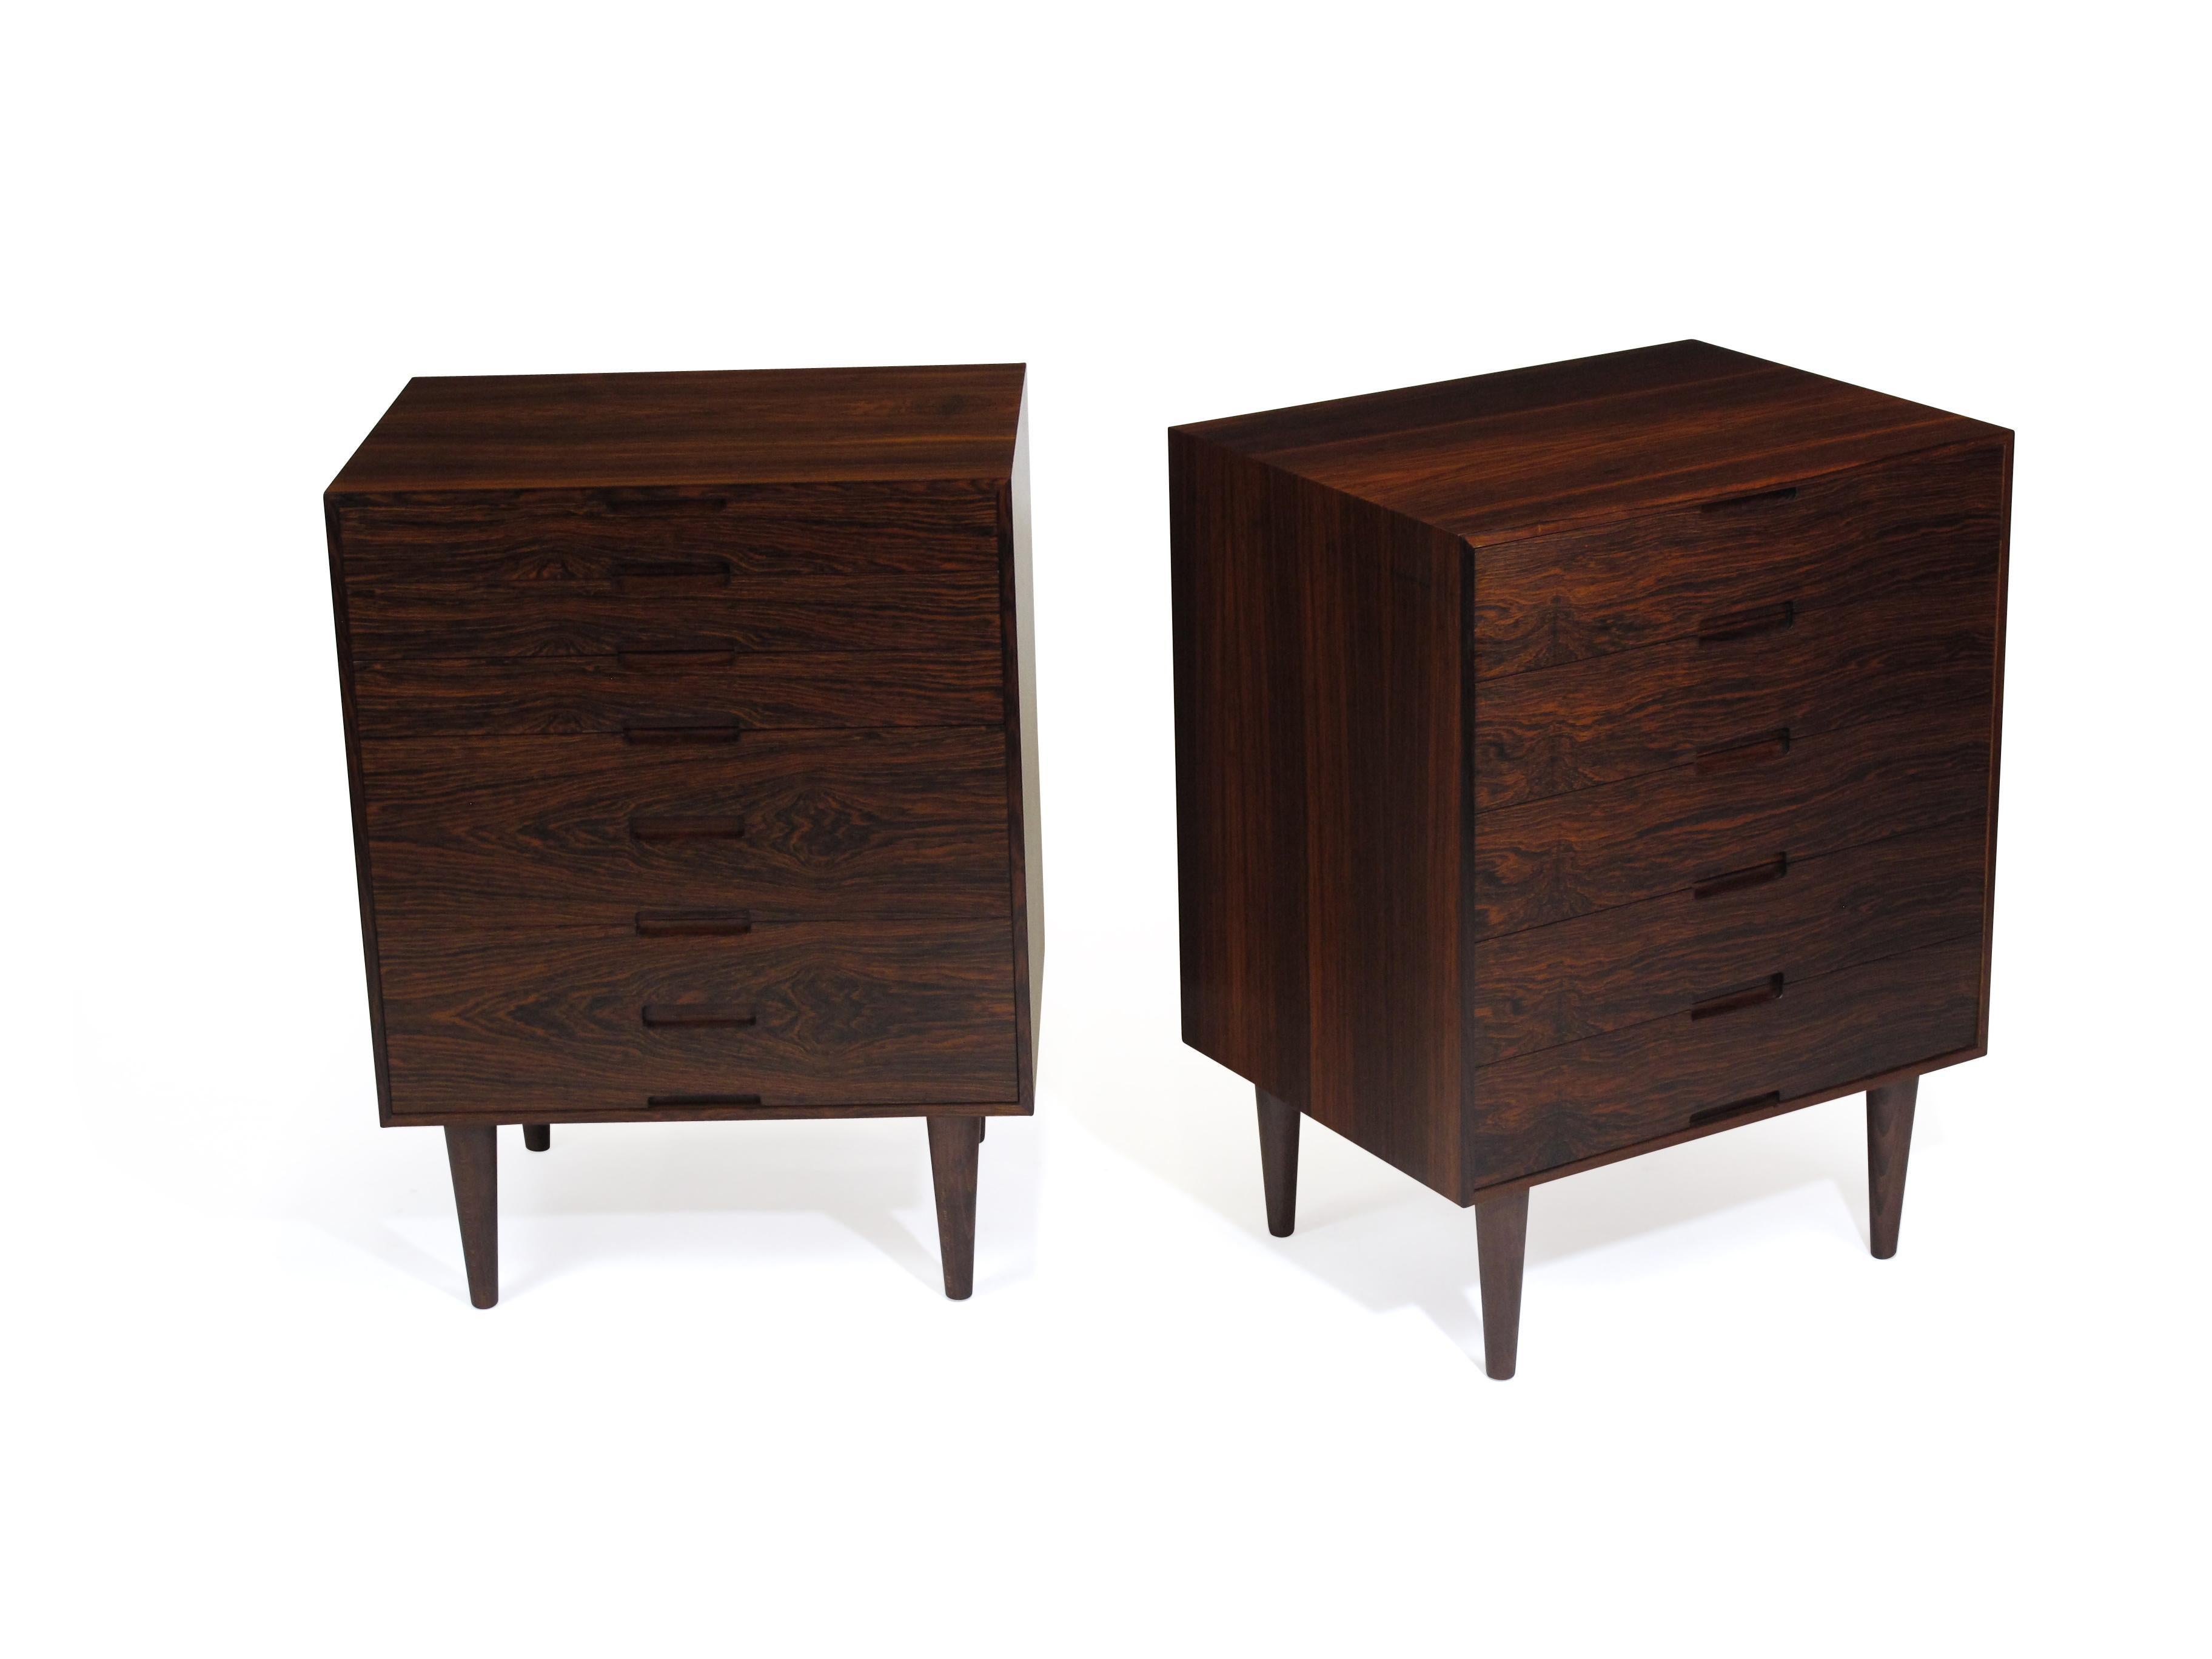 Oiled Brazilian Rosewood Nightstand Cabinets, a Pair